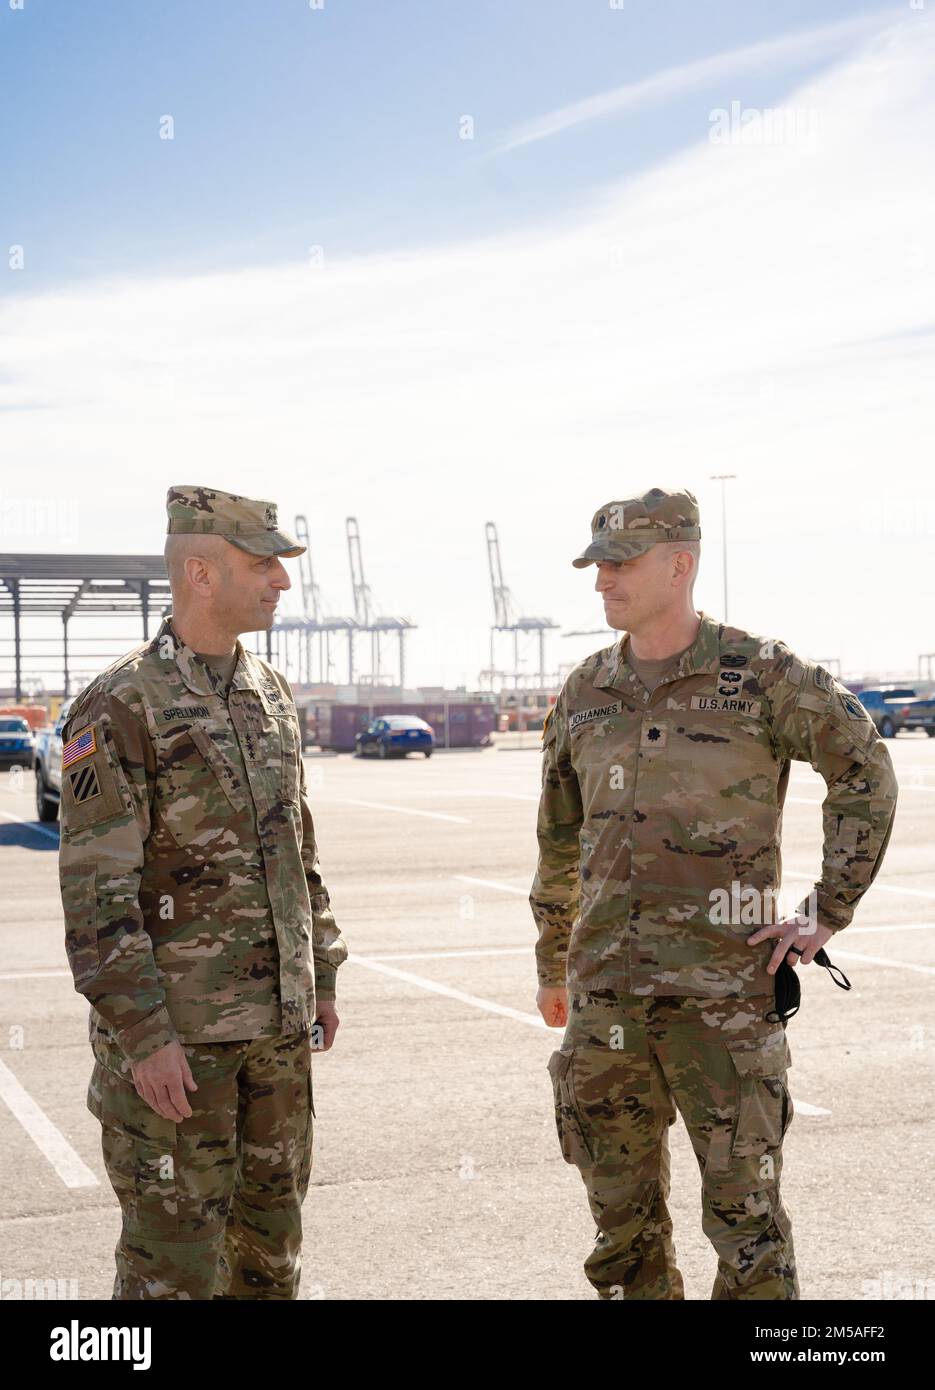 Lt. Col. Andrew Johannes (left), District commander, speaks with Lt. Gen. Scott Spellmon 55th chief of engineers and commanding general of the U.S. Army Corps of Engineers, prior to getting a tour of South Carolina Ports Authority. Stock Photo